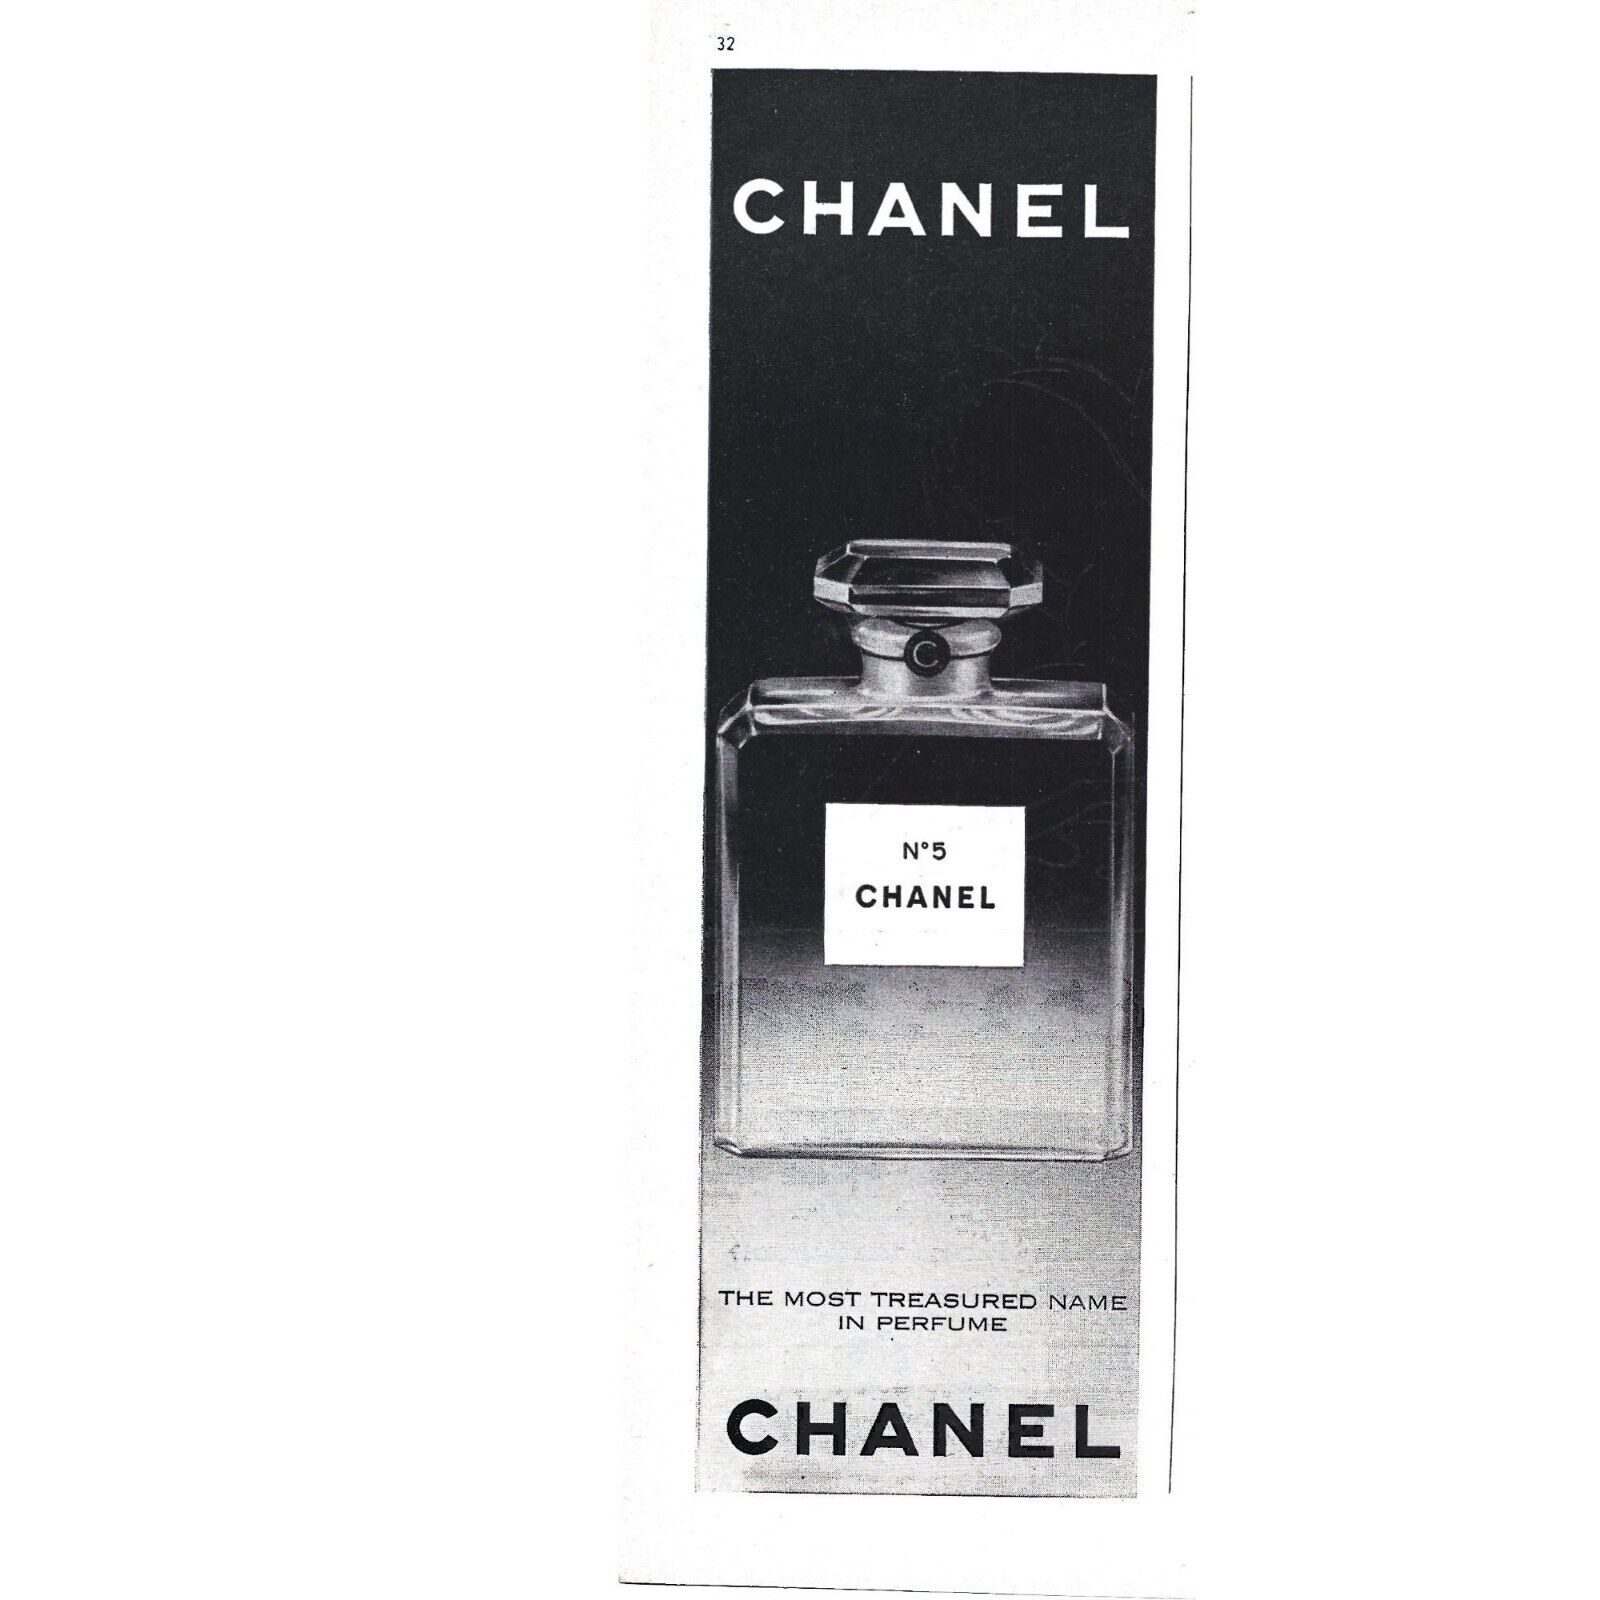 Chanel Number 5 No 5 Perfume 1960s Vintage Print Ad 9 x 3 inch Tall